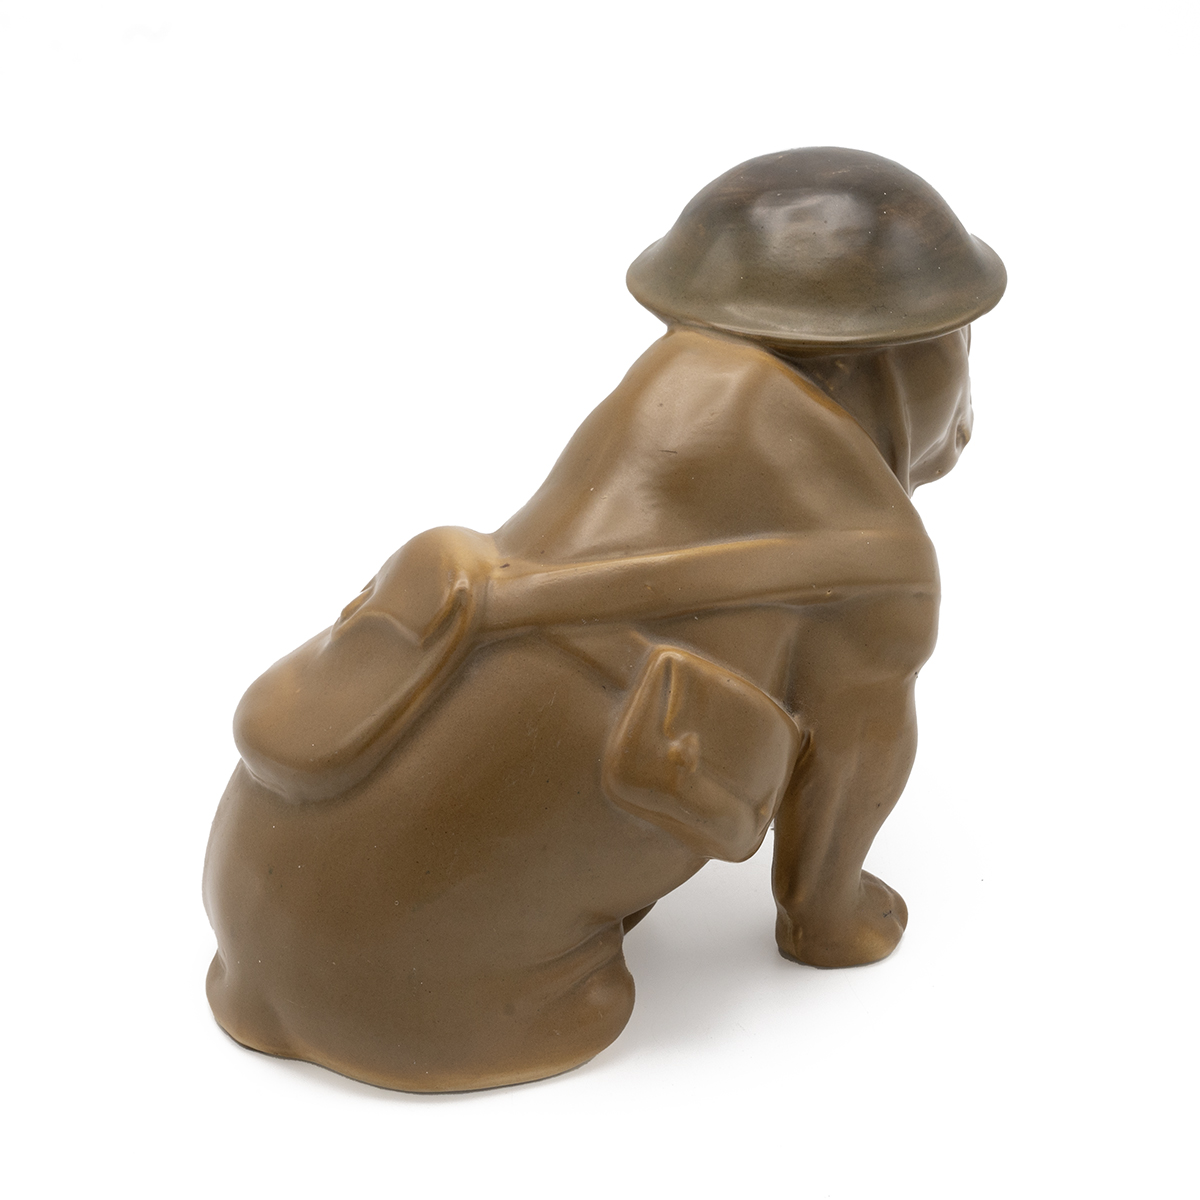 Royal Doulton "Tommy" Bulldog, modelled in WWI uniform and helmet, khaki glazed, with printed mar... - Image 2 of 3